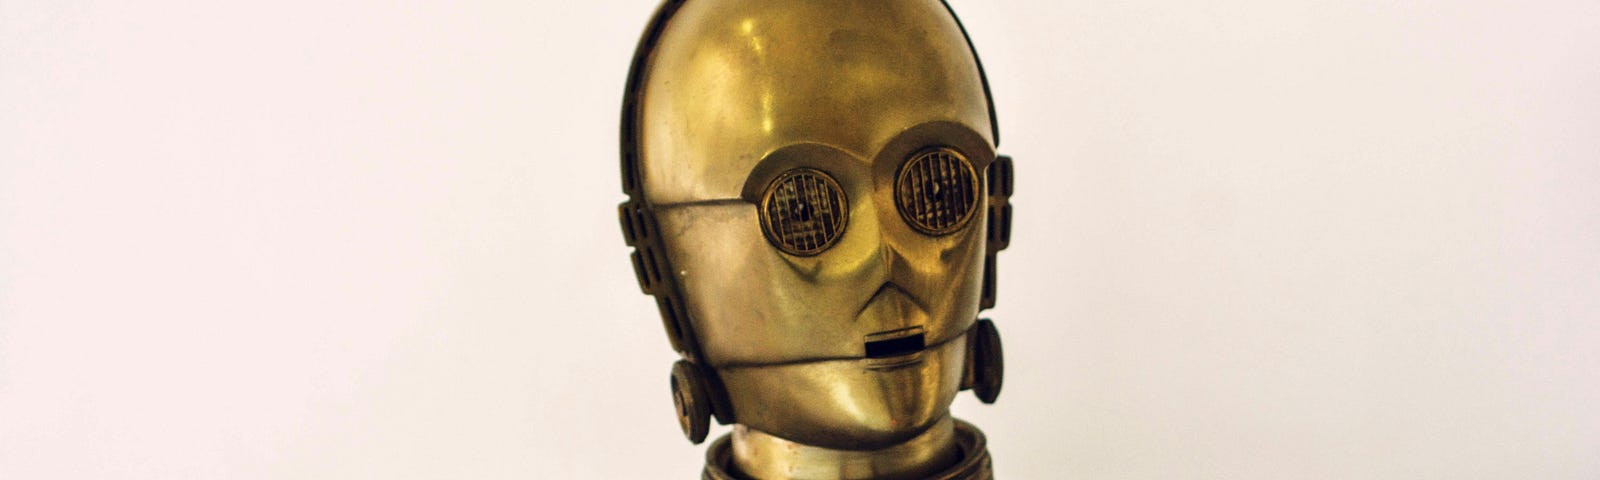 Robot from Star Wars- C3PO